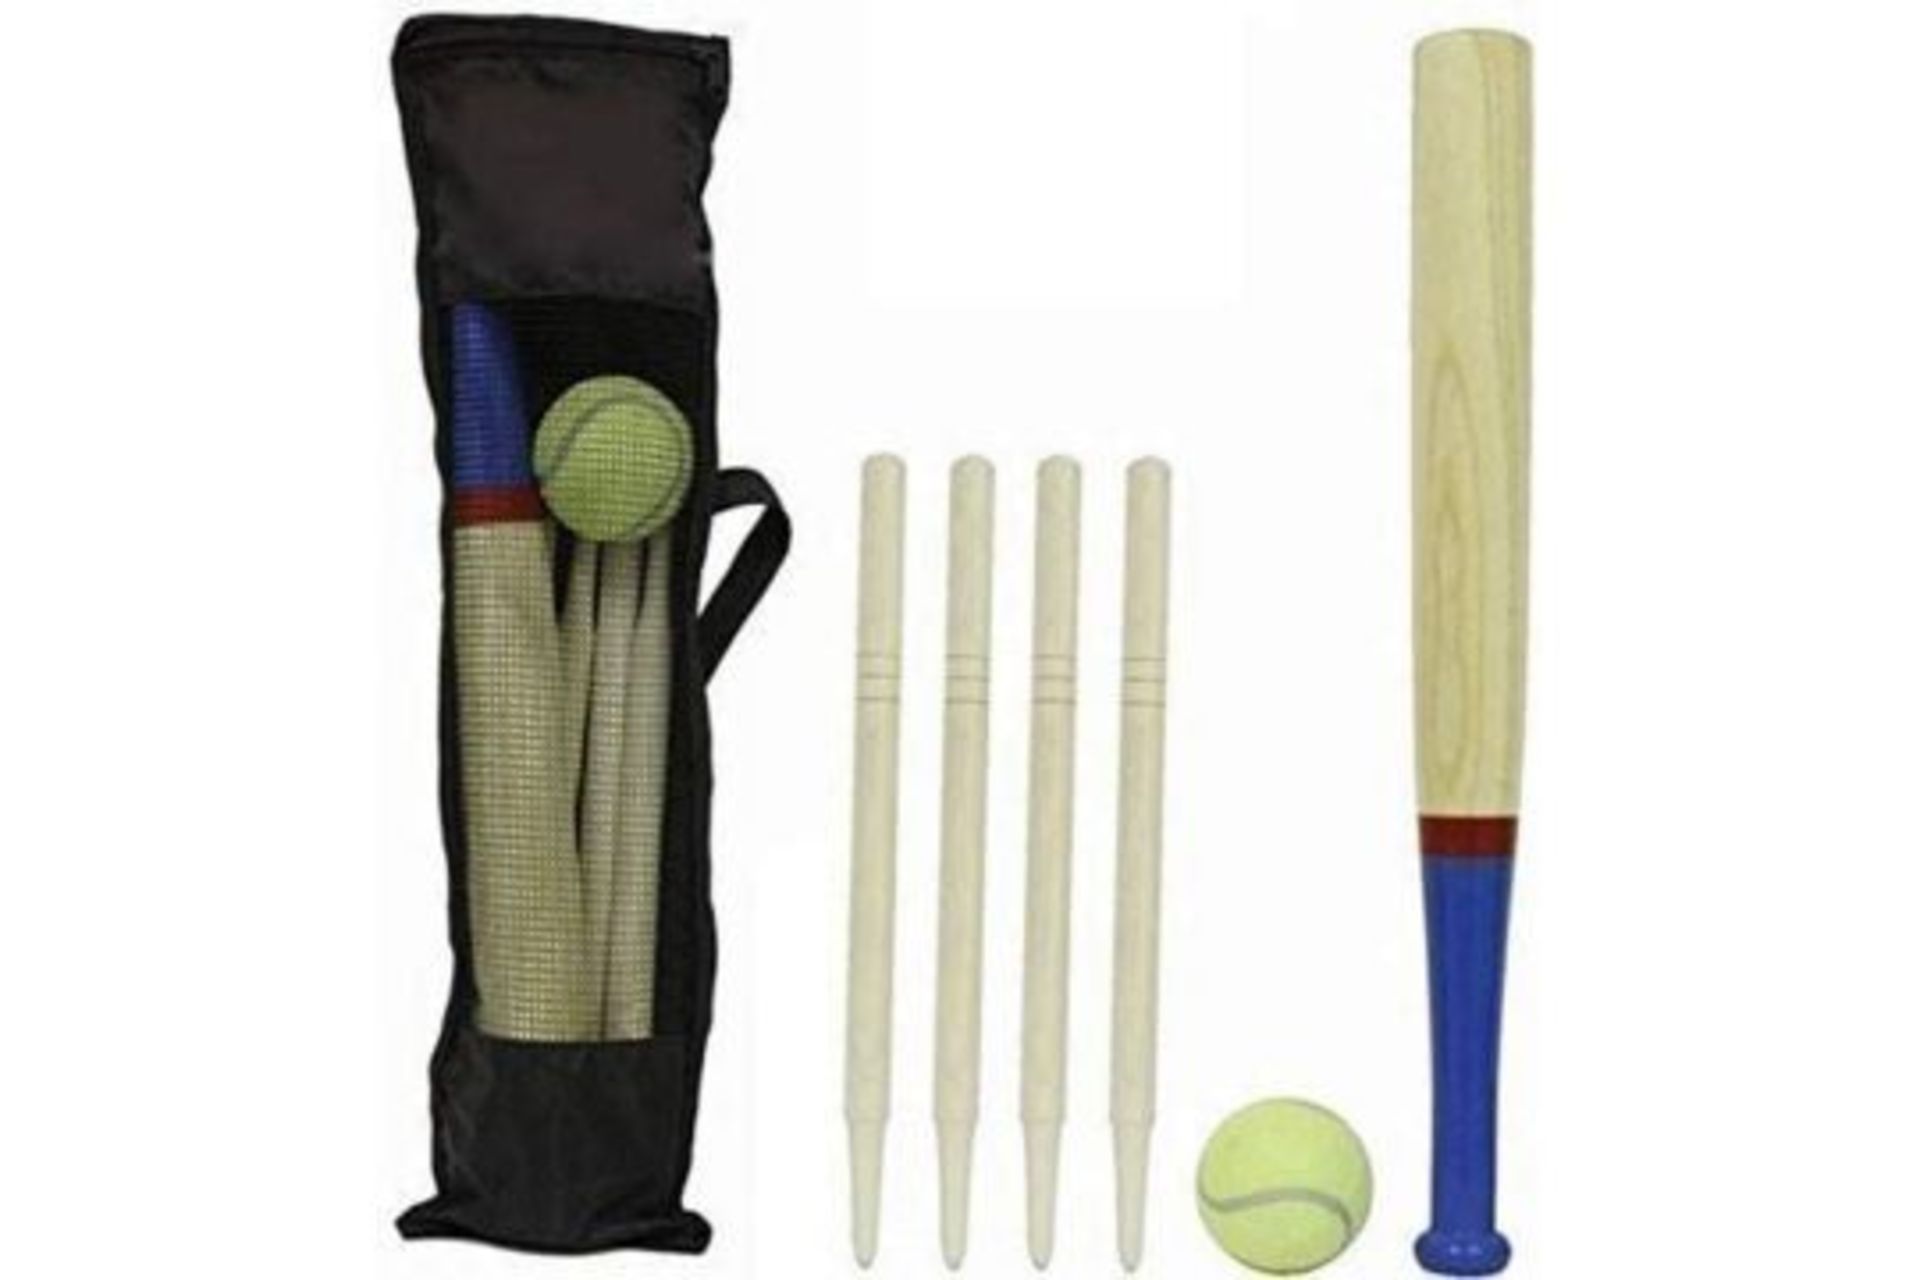 12 x NEW & PACKAGED SETS OF DIVCHI 6 Piece Wooden Rounders Set & Carry Bag - Baseball Bat & Soft